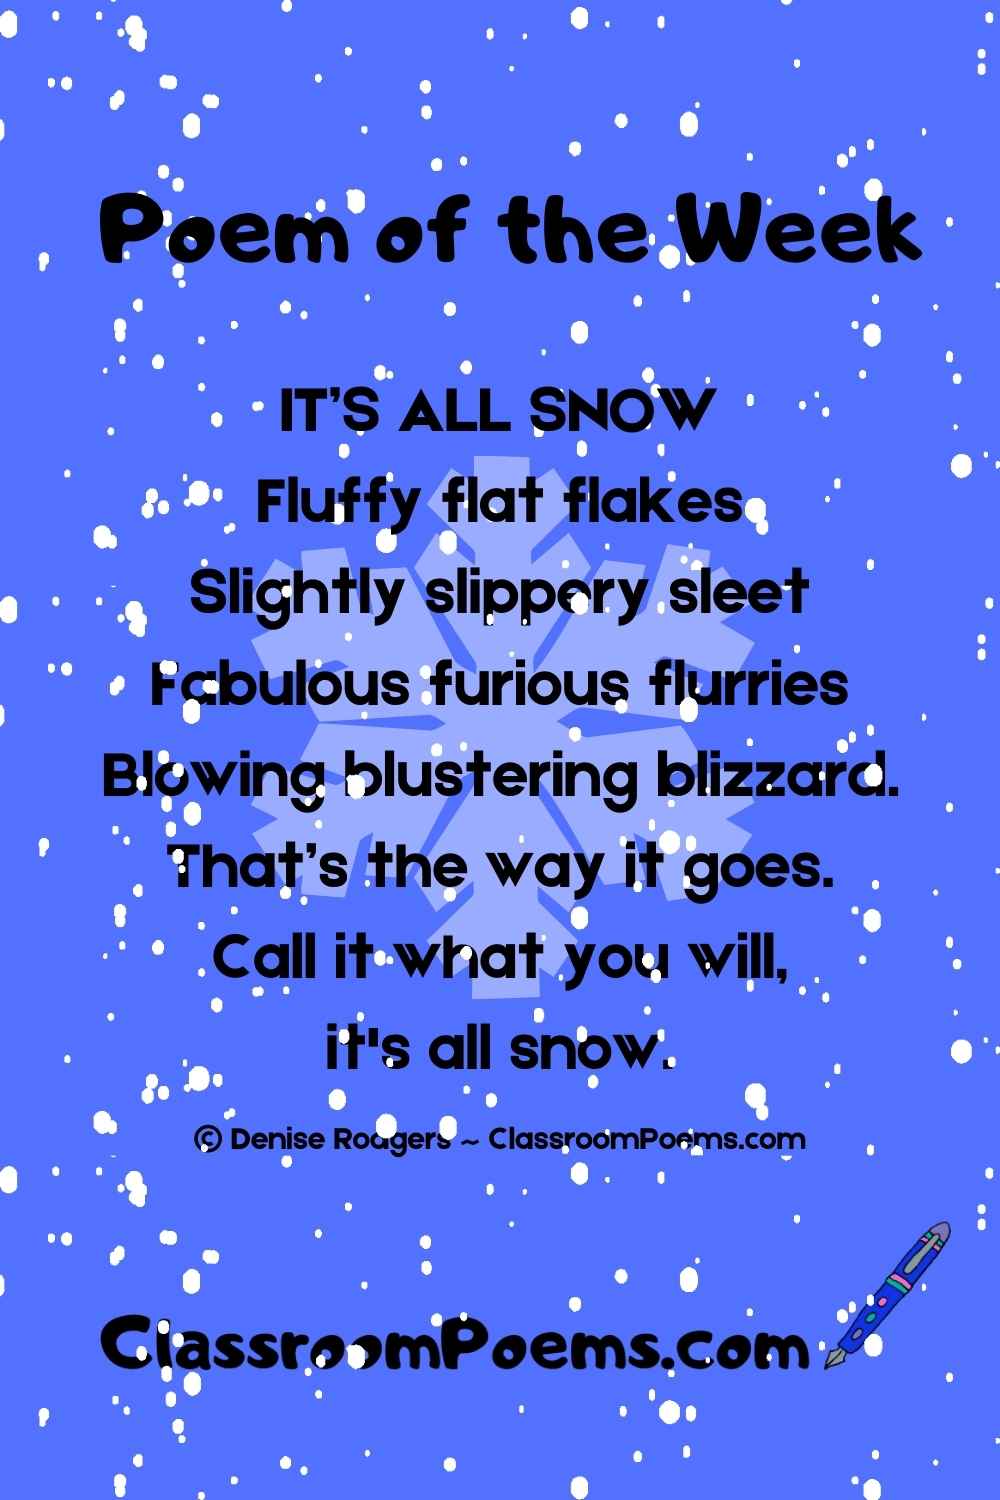 IT'S ALL SNOW, a winter poem for kids, by Denise Rodgers on ClassroomPoems.com.